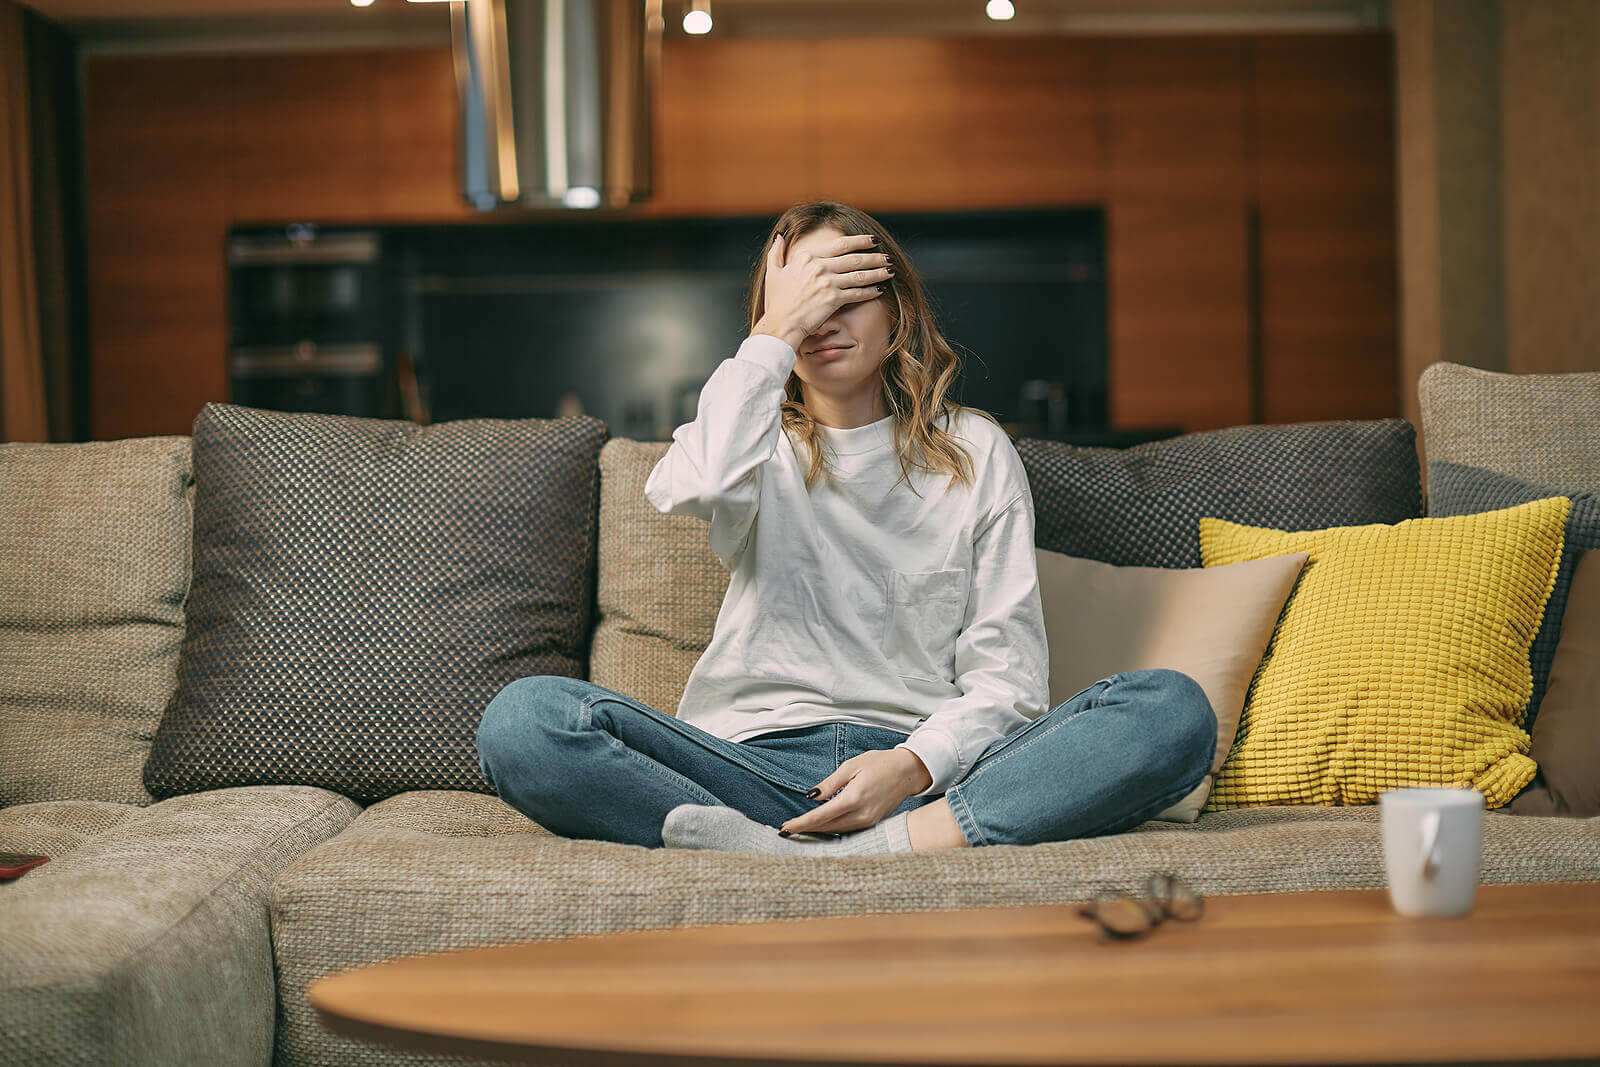 Photo of a young woman sitting on a couch with her hand on her forehead looking upset. Are you feeling lonely and hopeless? Learn how depression treatment in Georgia can help you manage your symptoms.